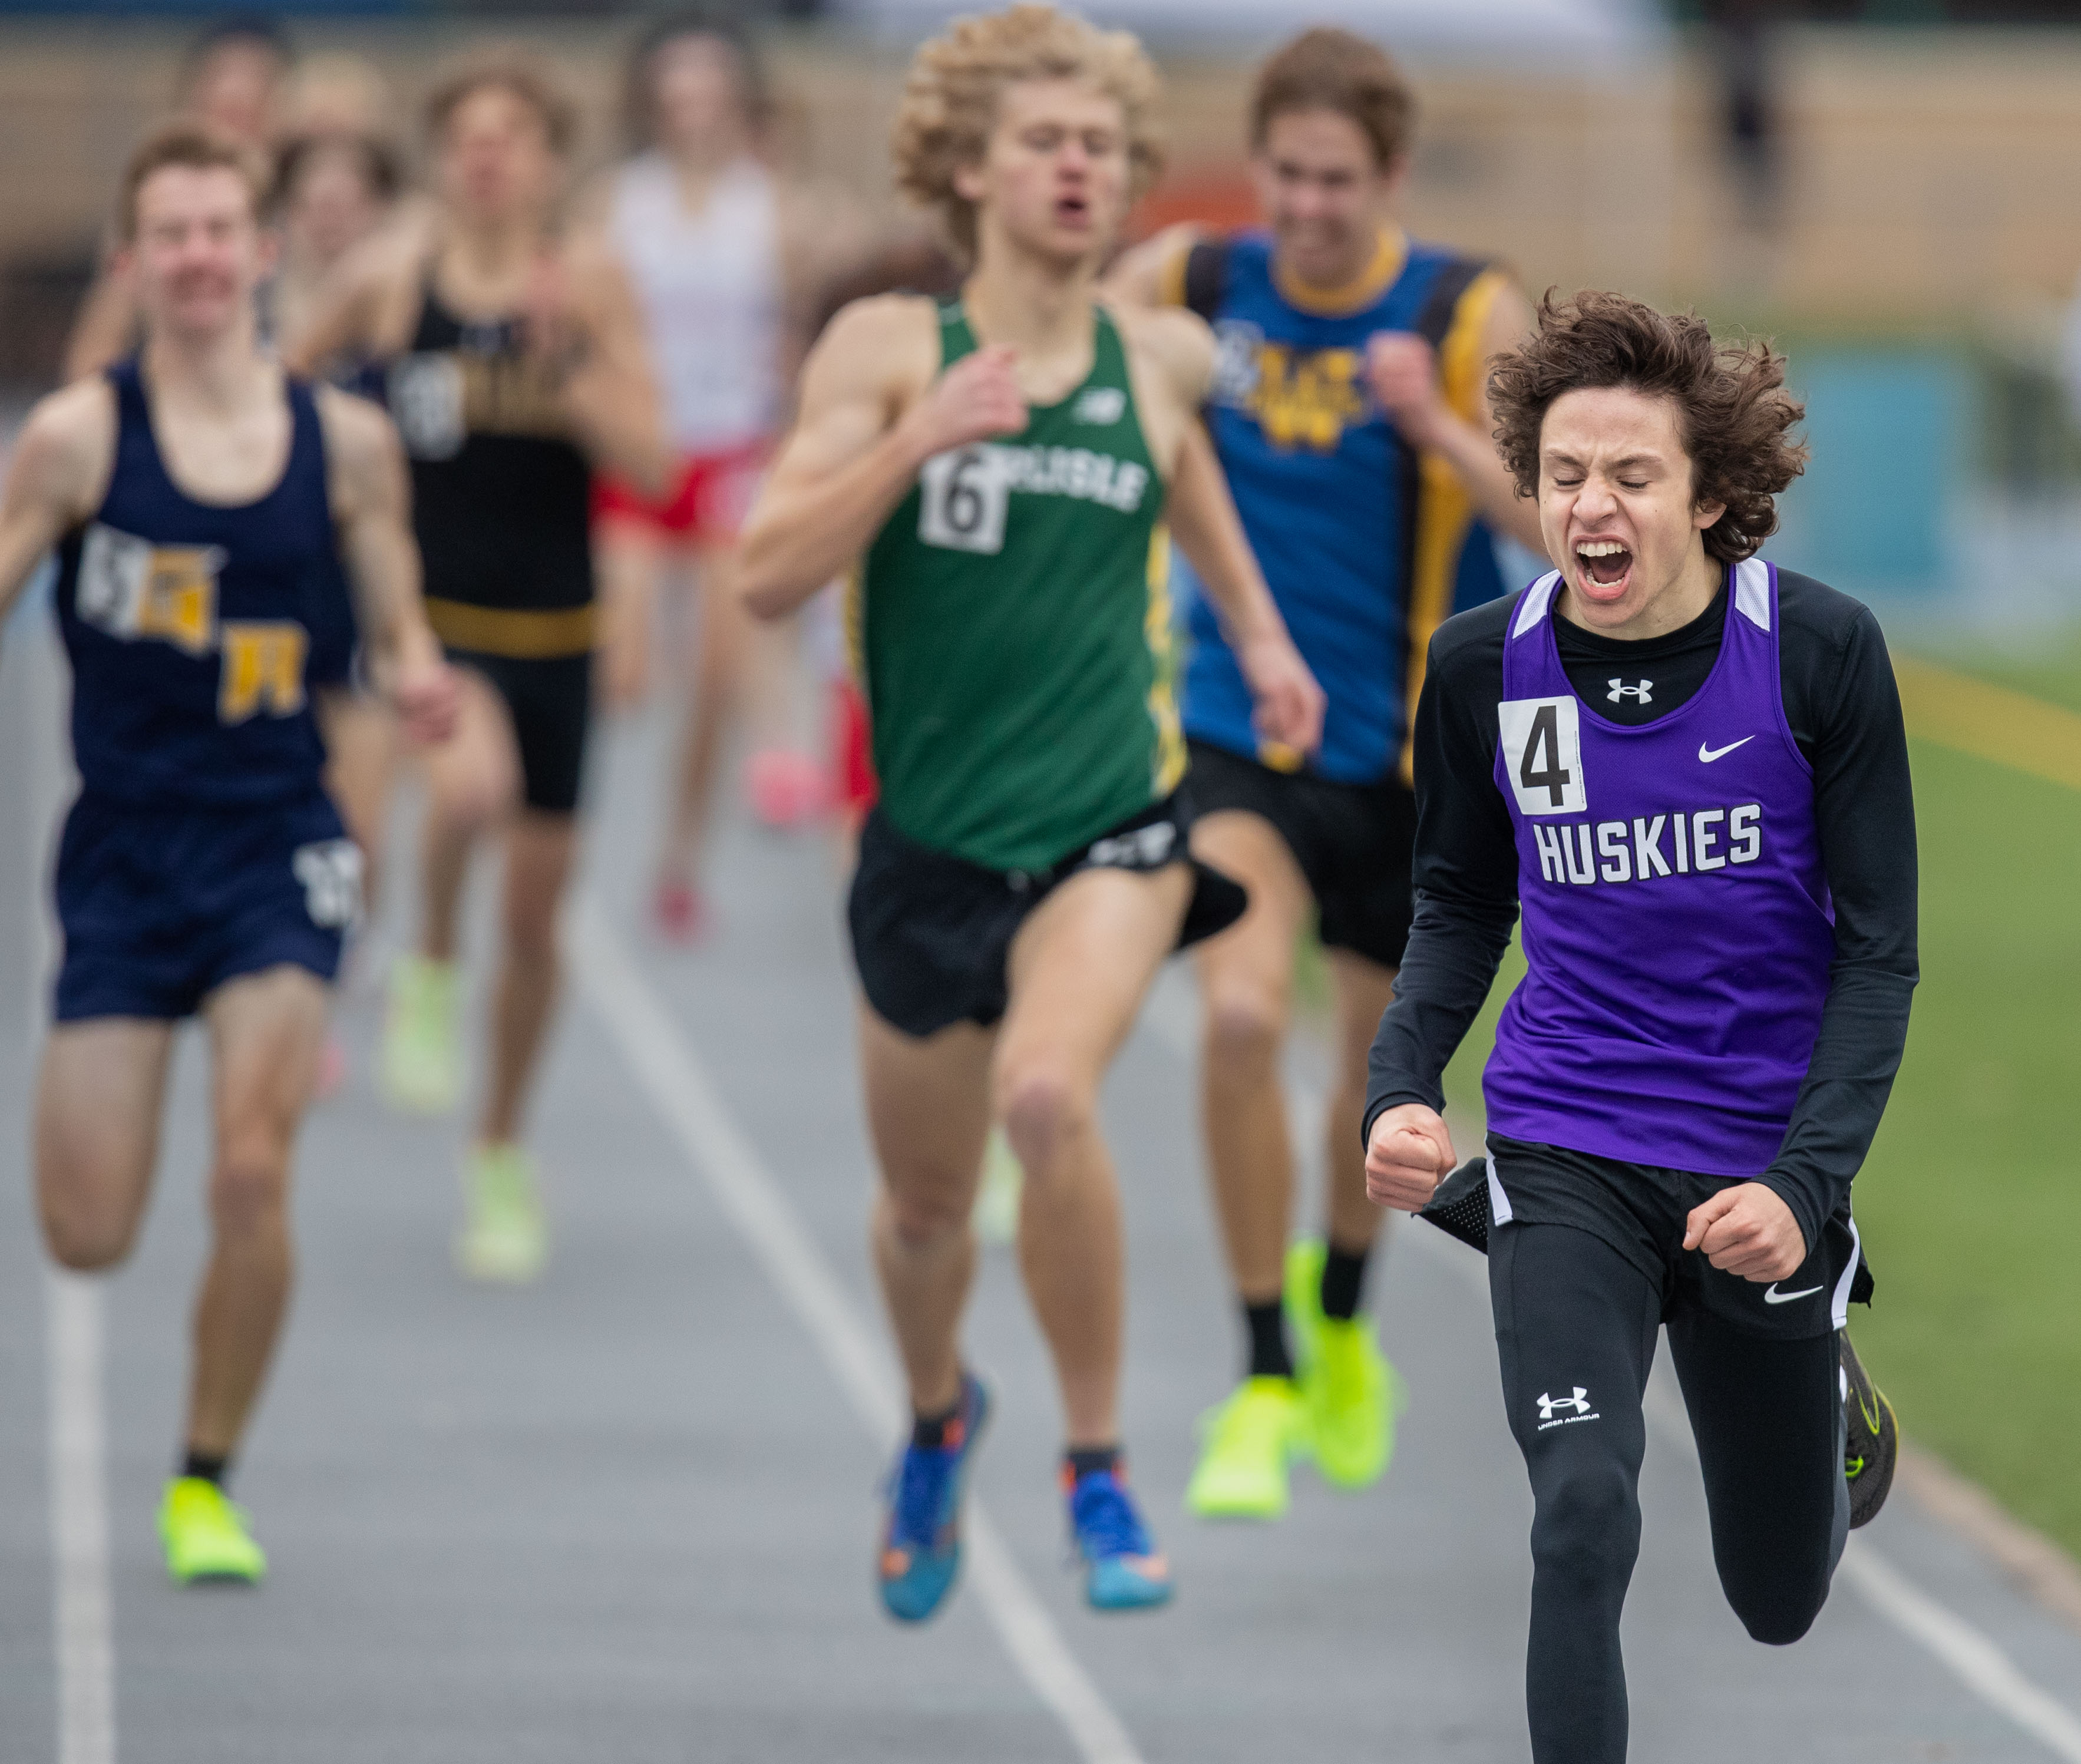 Carter Smith, Mifflin County, wins the 800 meter run at the 2023 Tim Cook Memorial Invitational track & field meet at Chambersburg, Pa., Mar. 25, 2023.Mark Pynes | pennlive.com